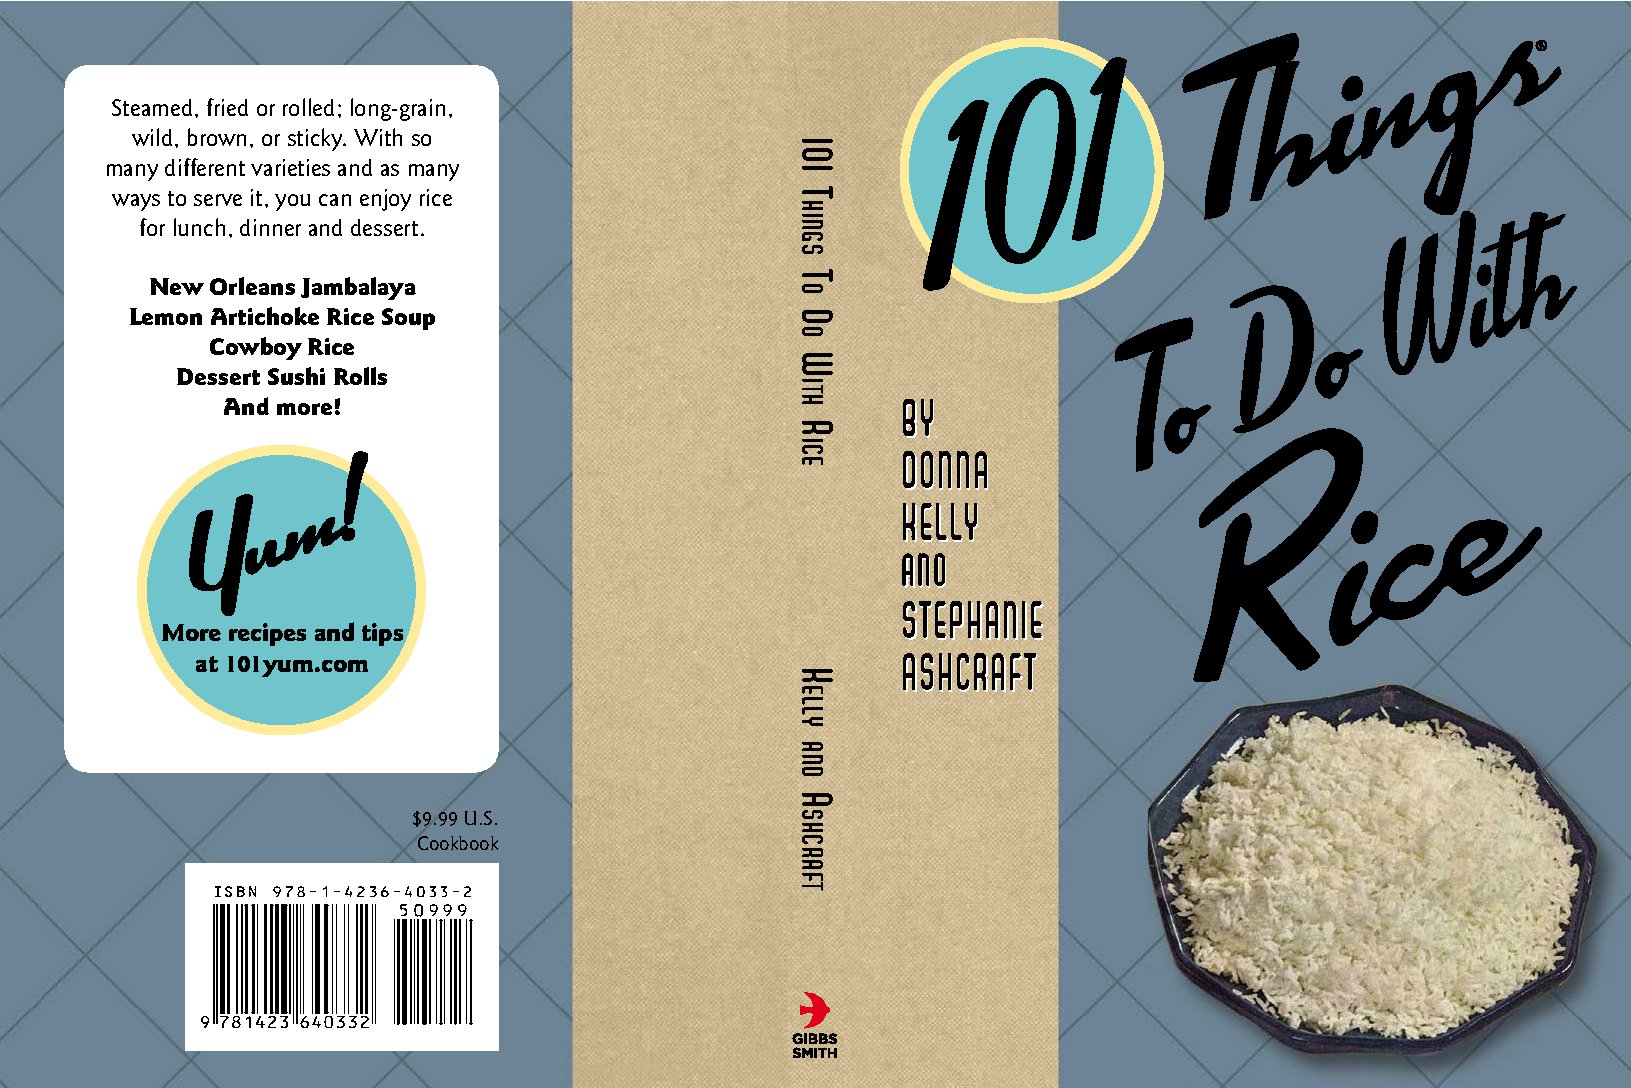 101 Things to Do with Rice